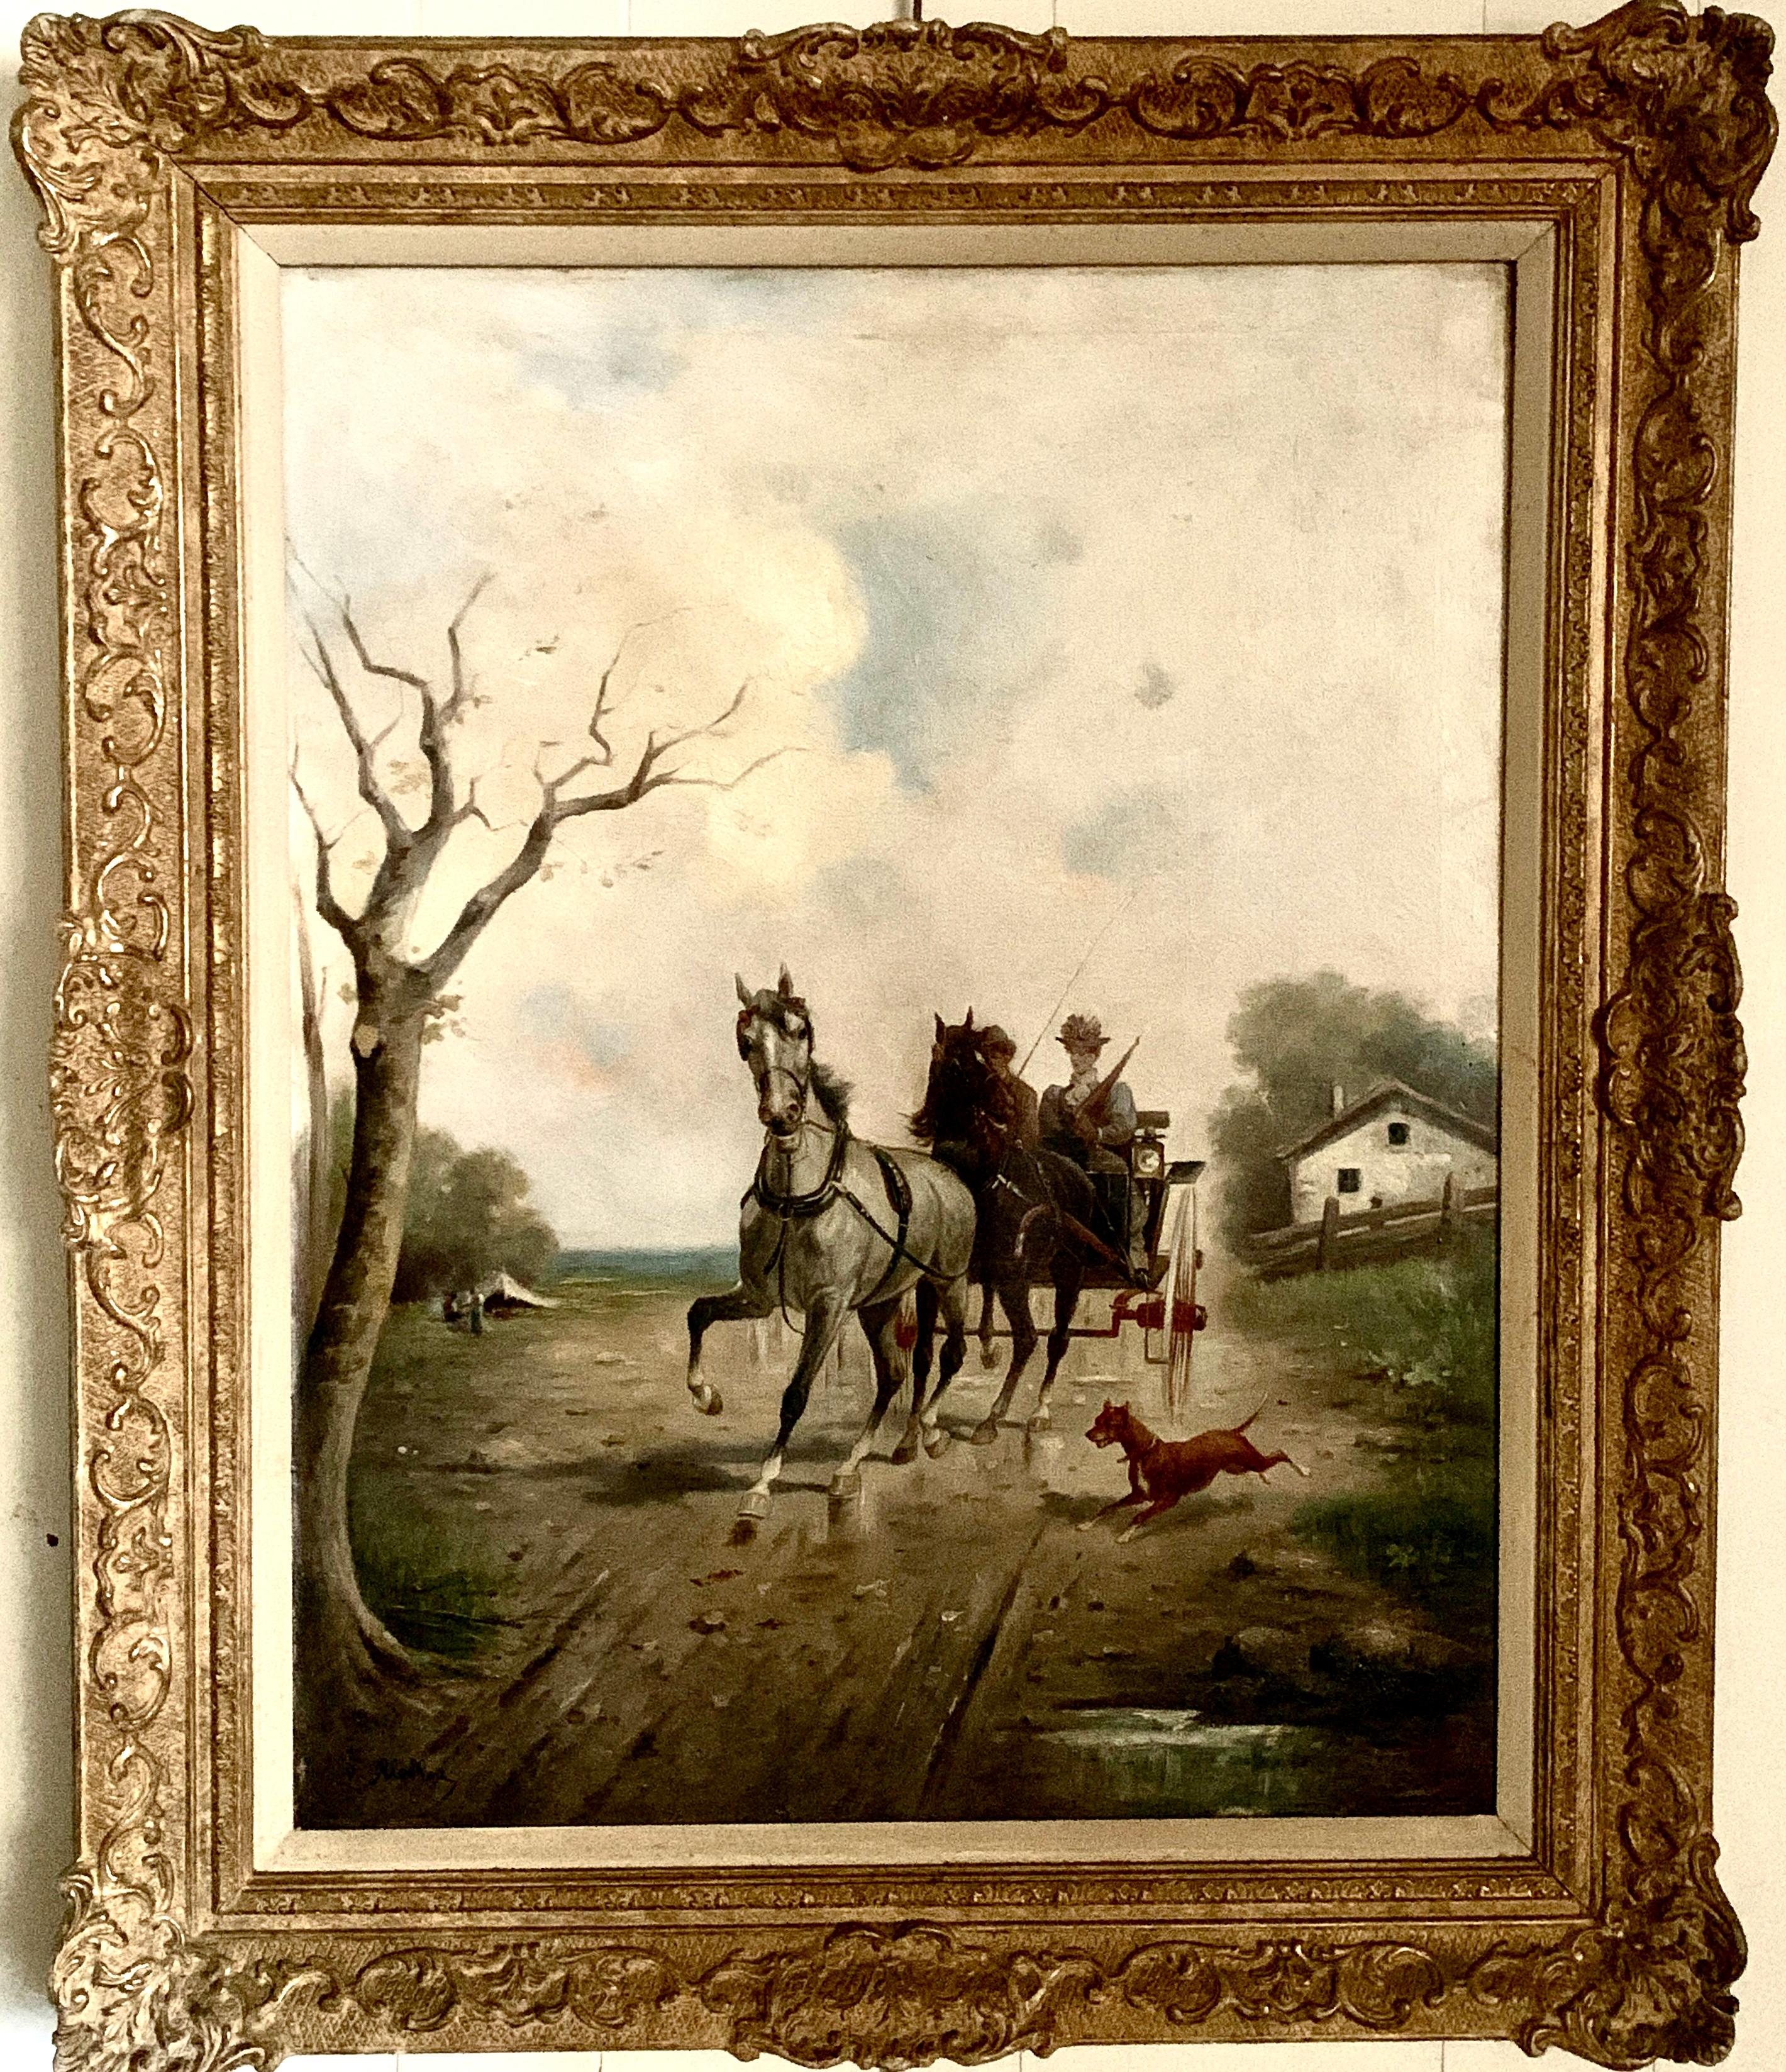 L.Riekers Animal Painting - 19th century oil painting of a horse and buggy with a two figures, in landscape